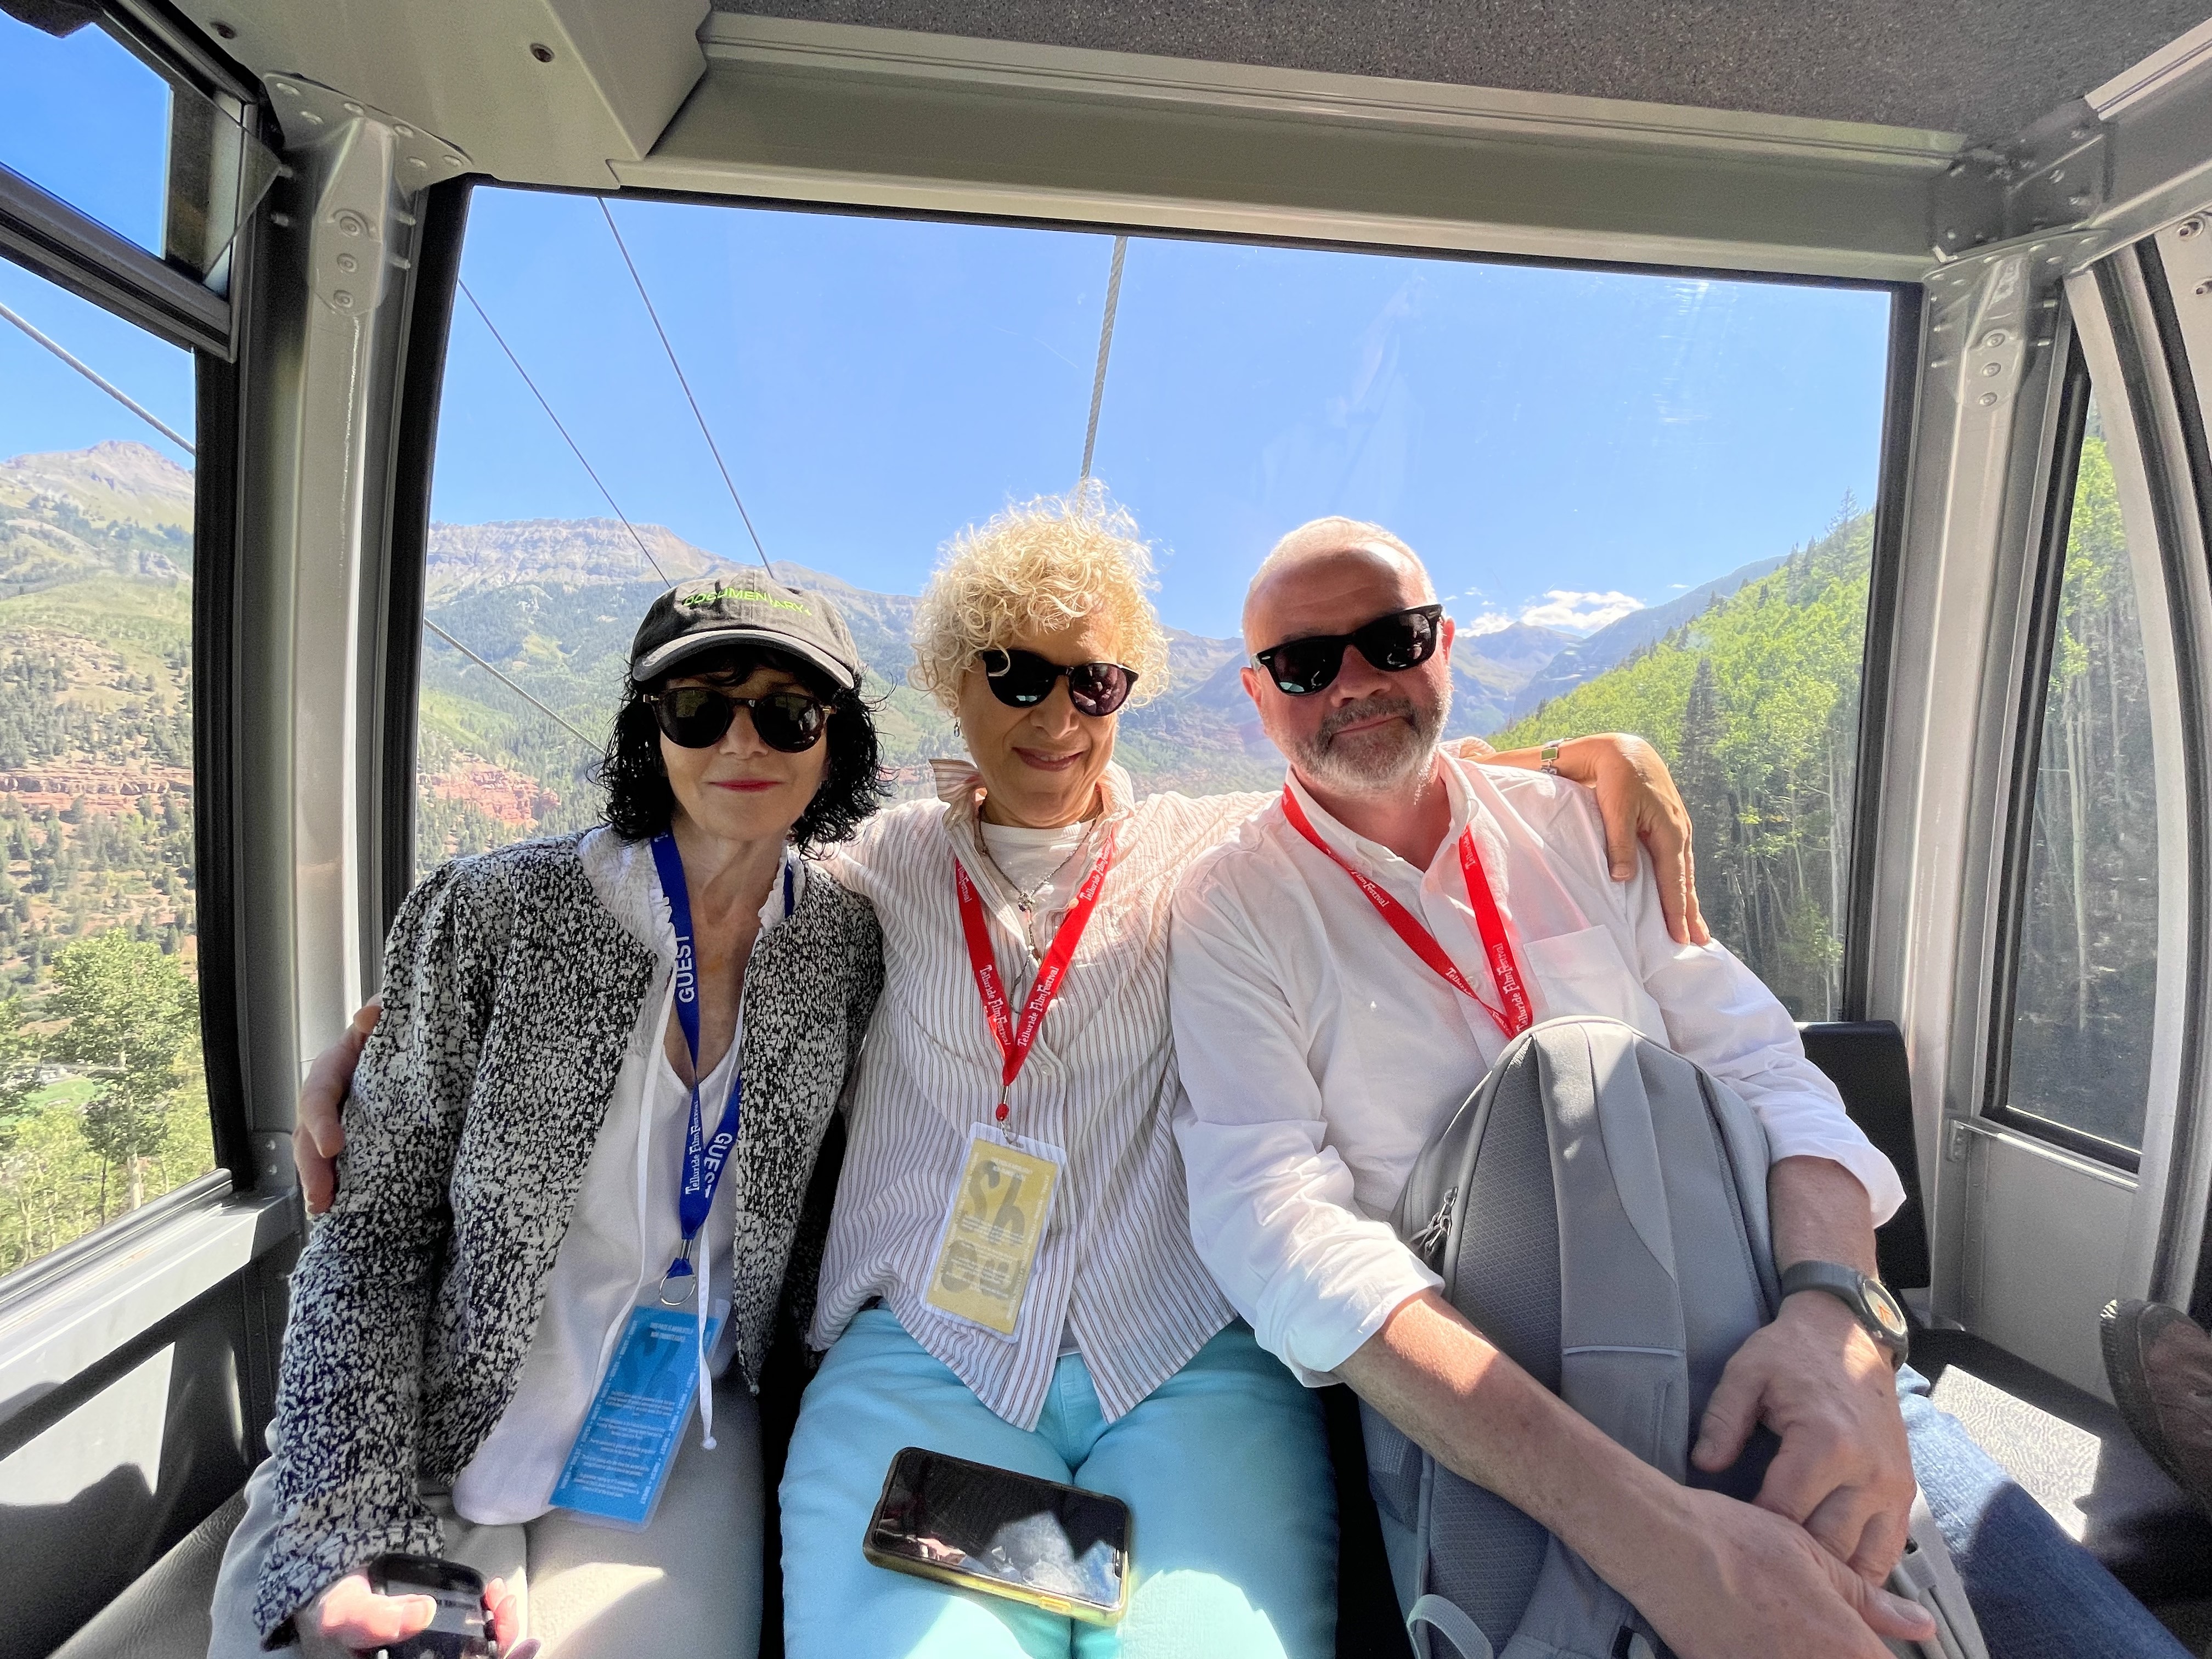 Photo taken at Telluride in 2022 of Nancy Buirski, Susan Margolin, and Simon Kilmurry (from left to right).